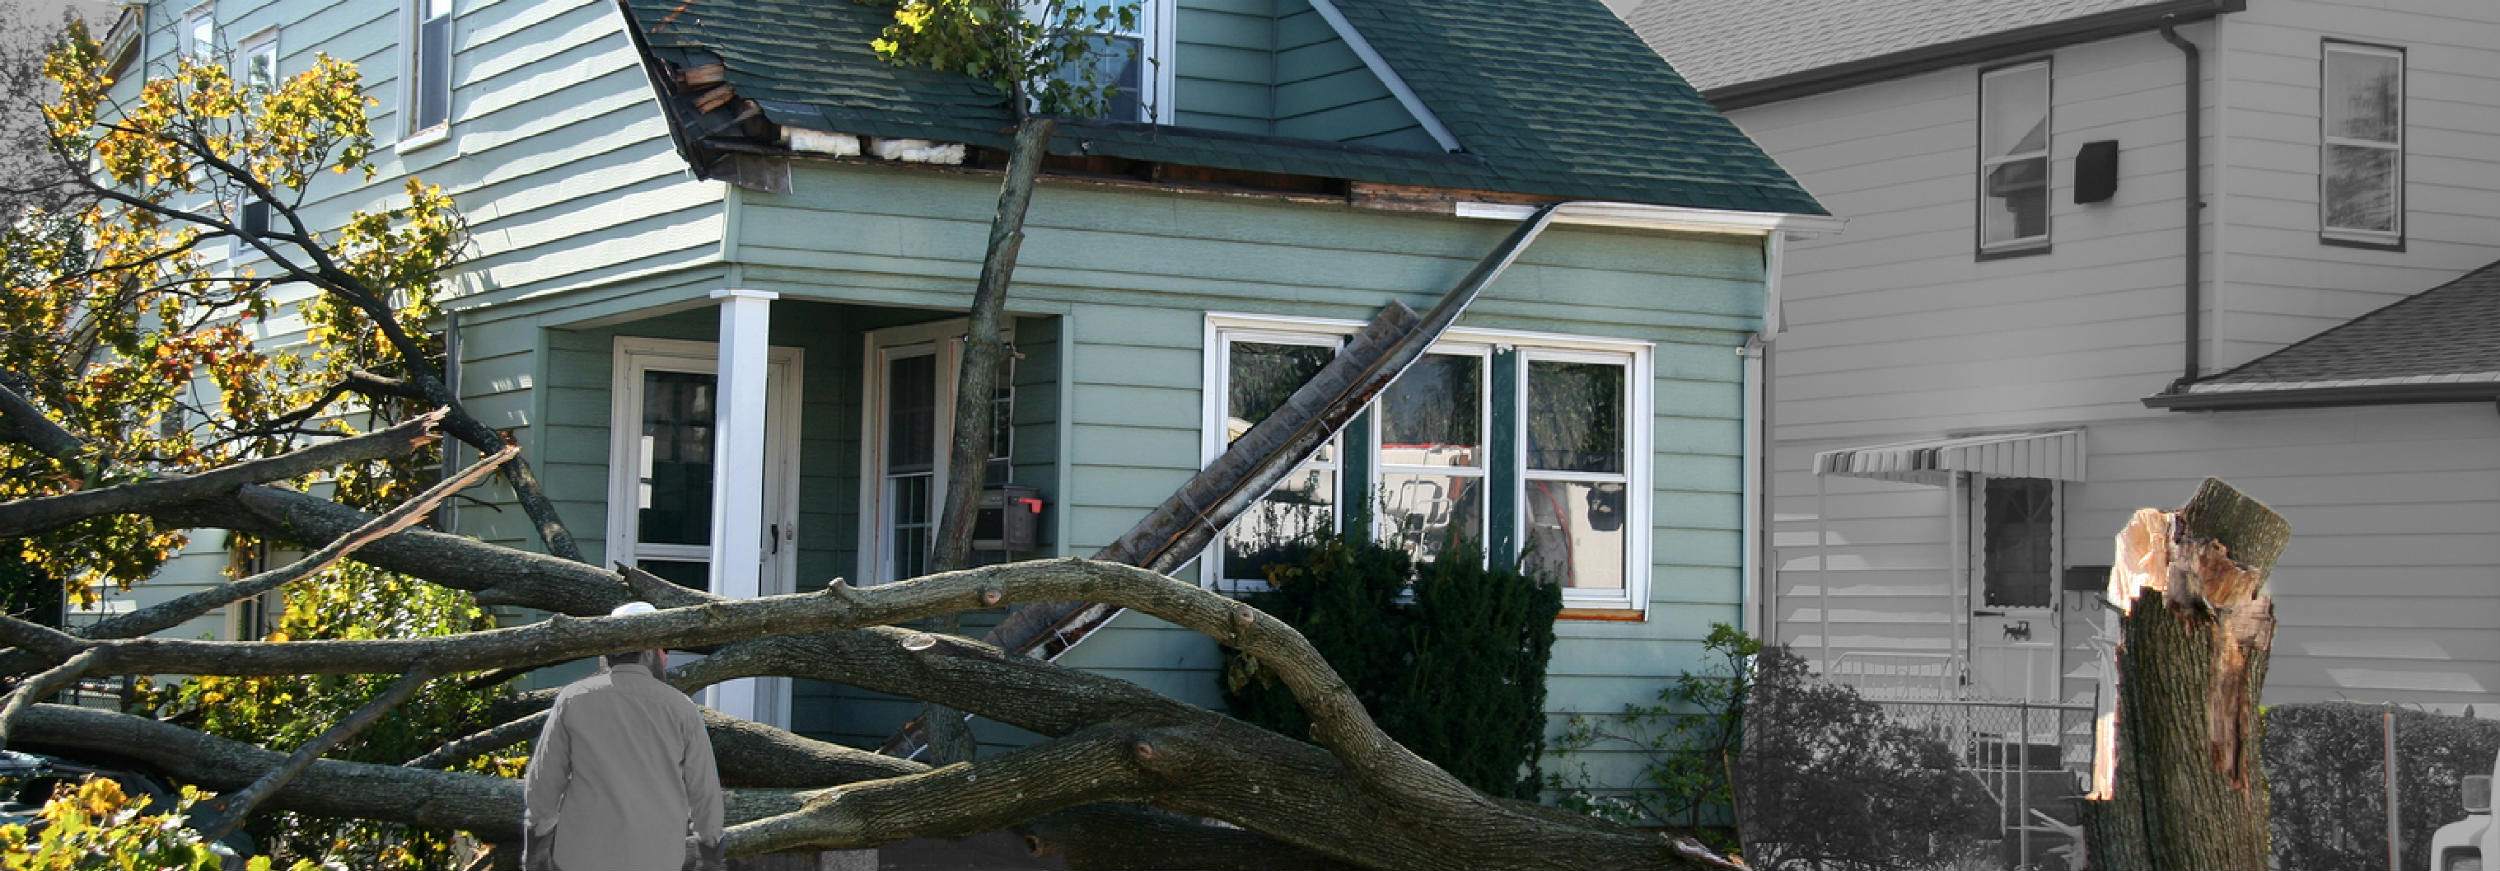 Roof Damage - Pic 1